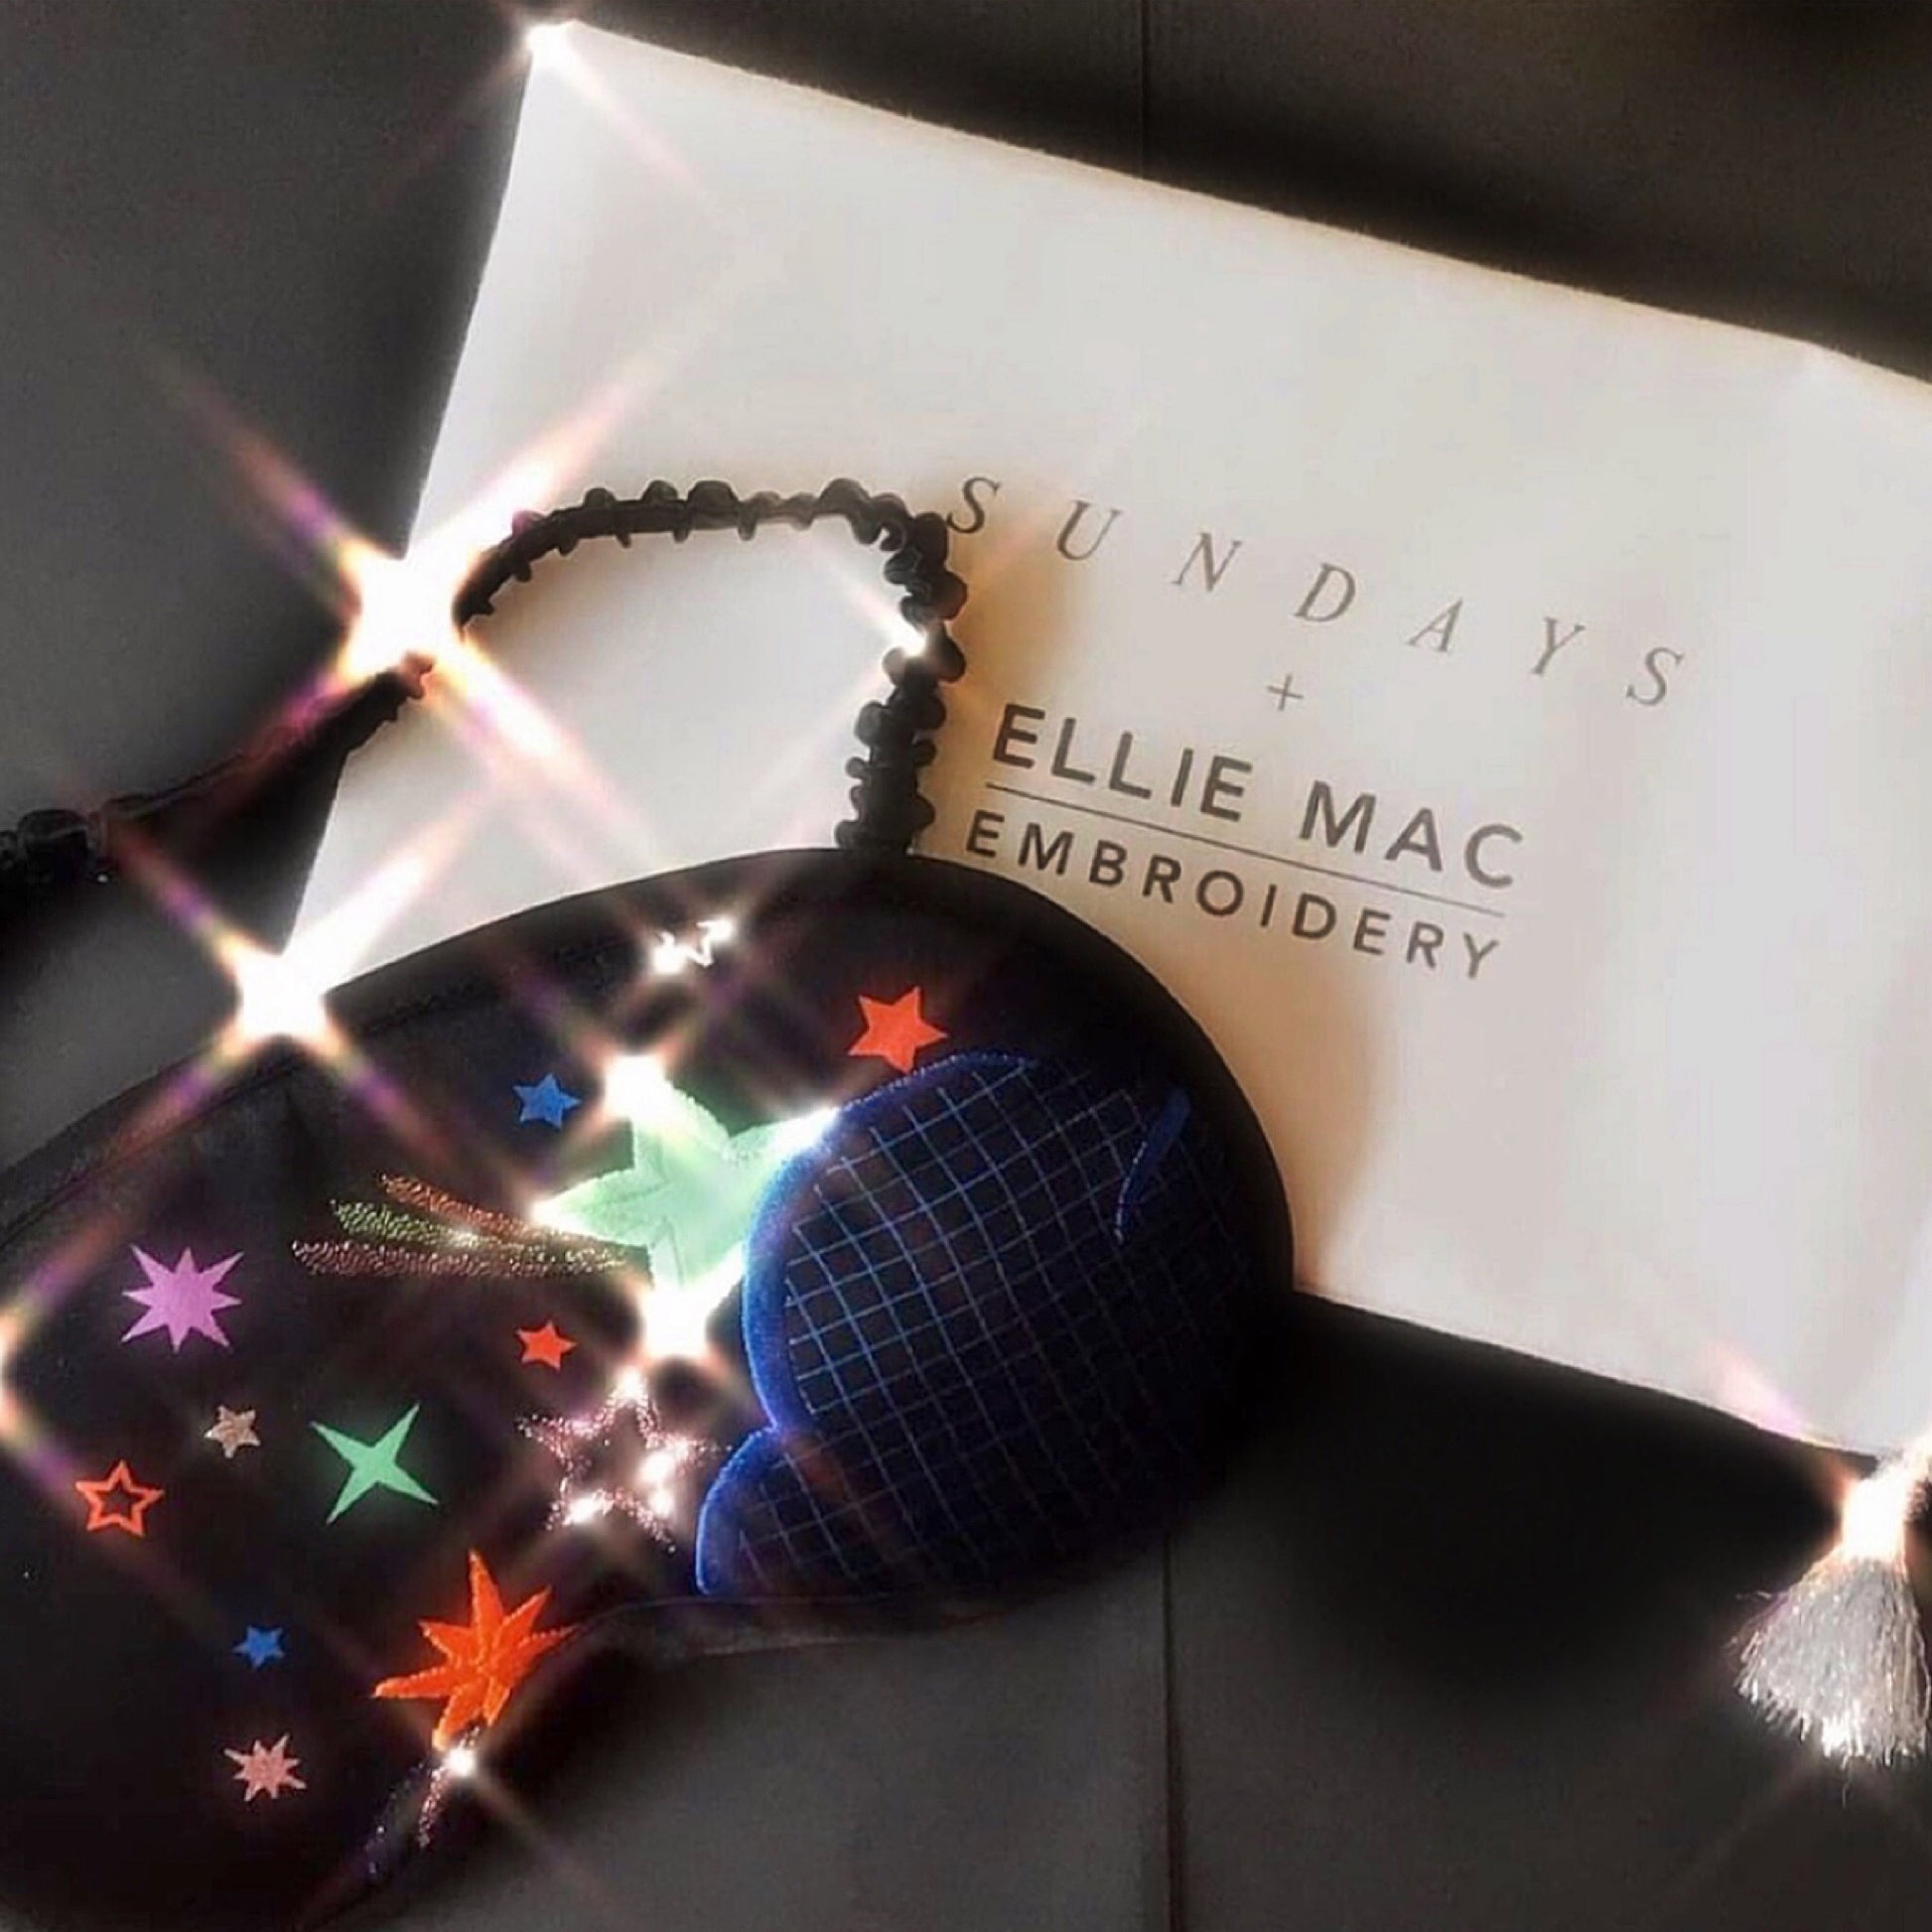 Disco nap eye mask and a white postcard which readys 'Sundays + Ellie Mac Enbroidery', both items are posed on a dark background